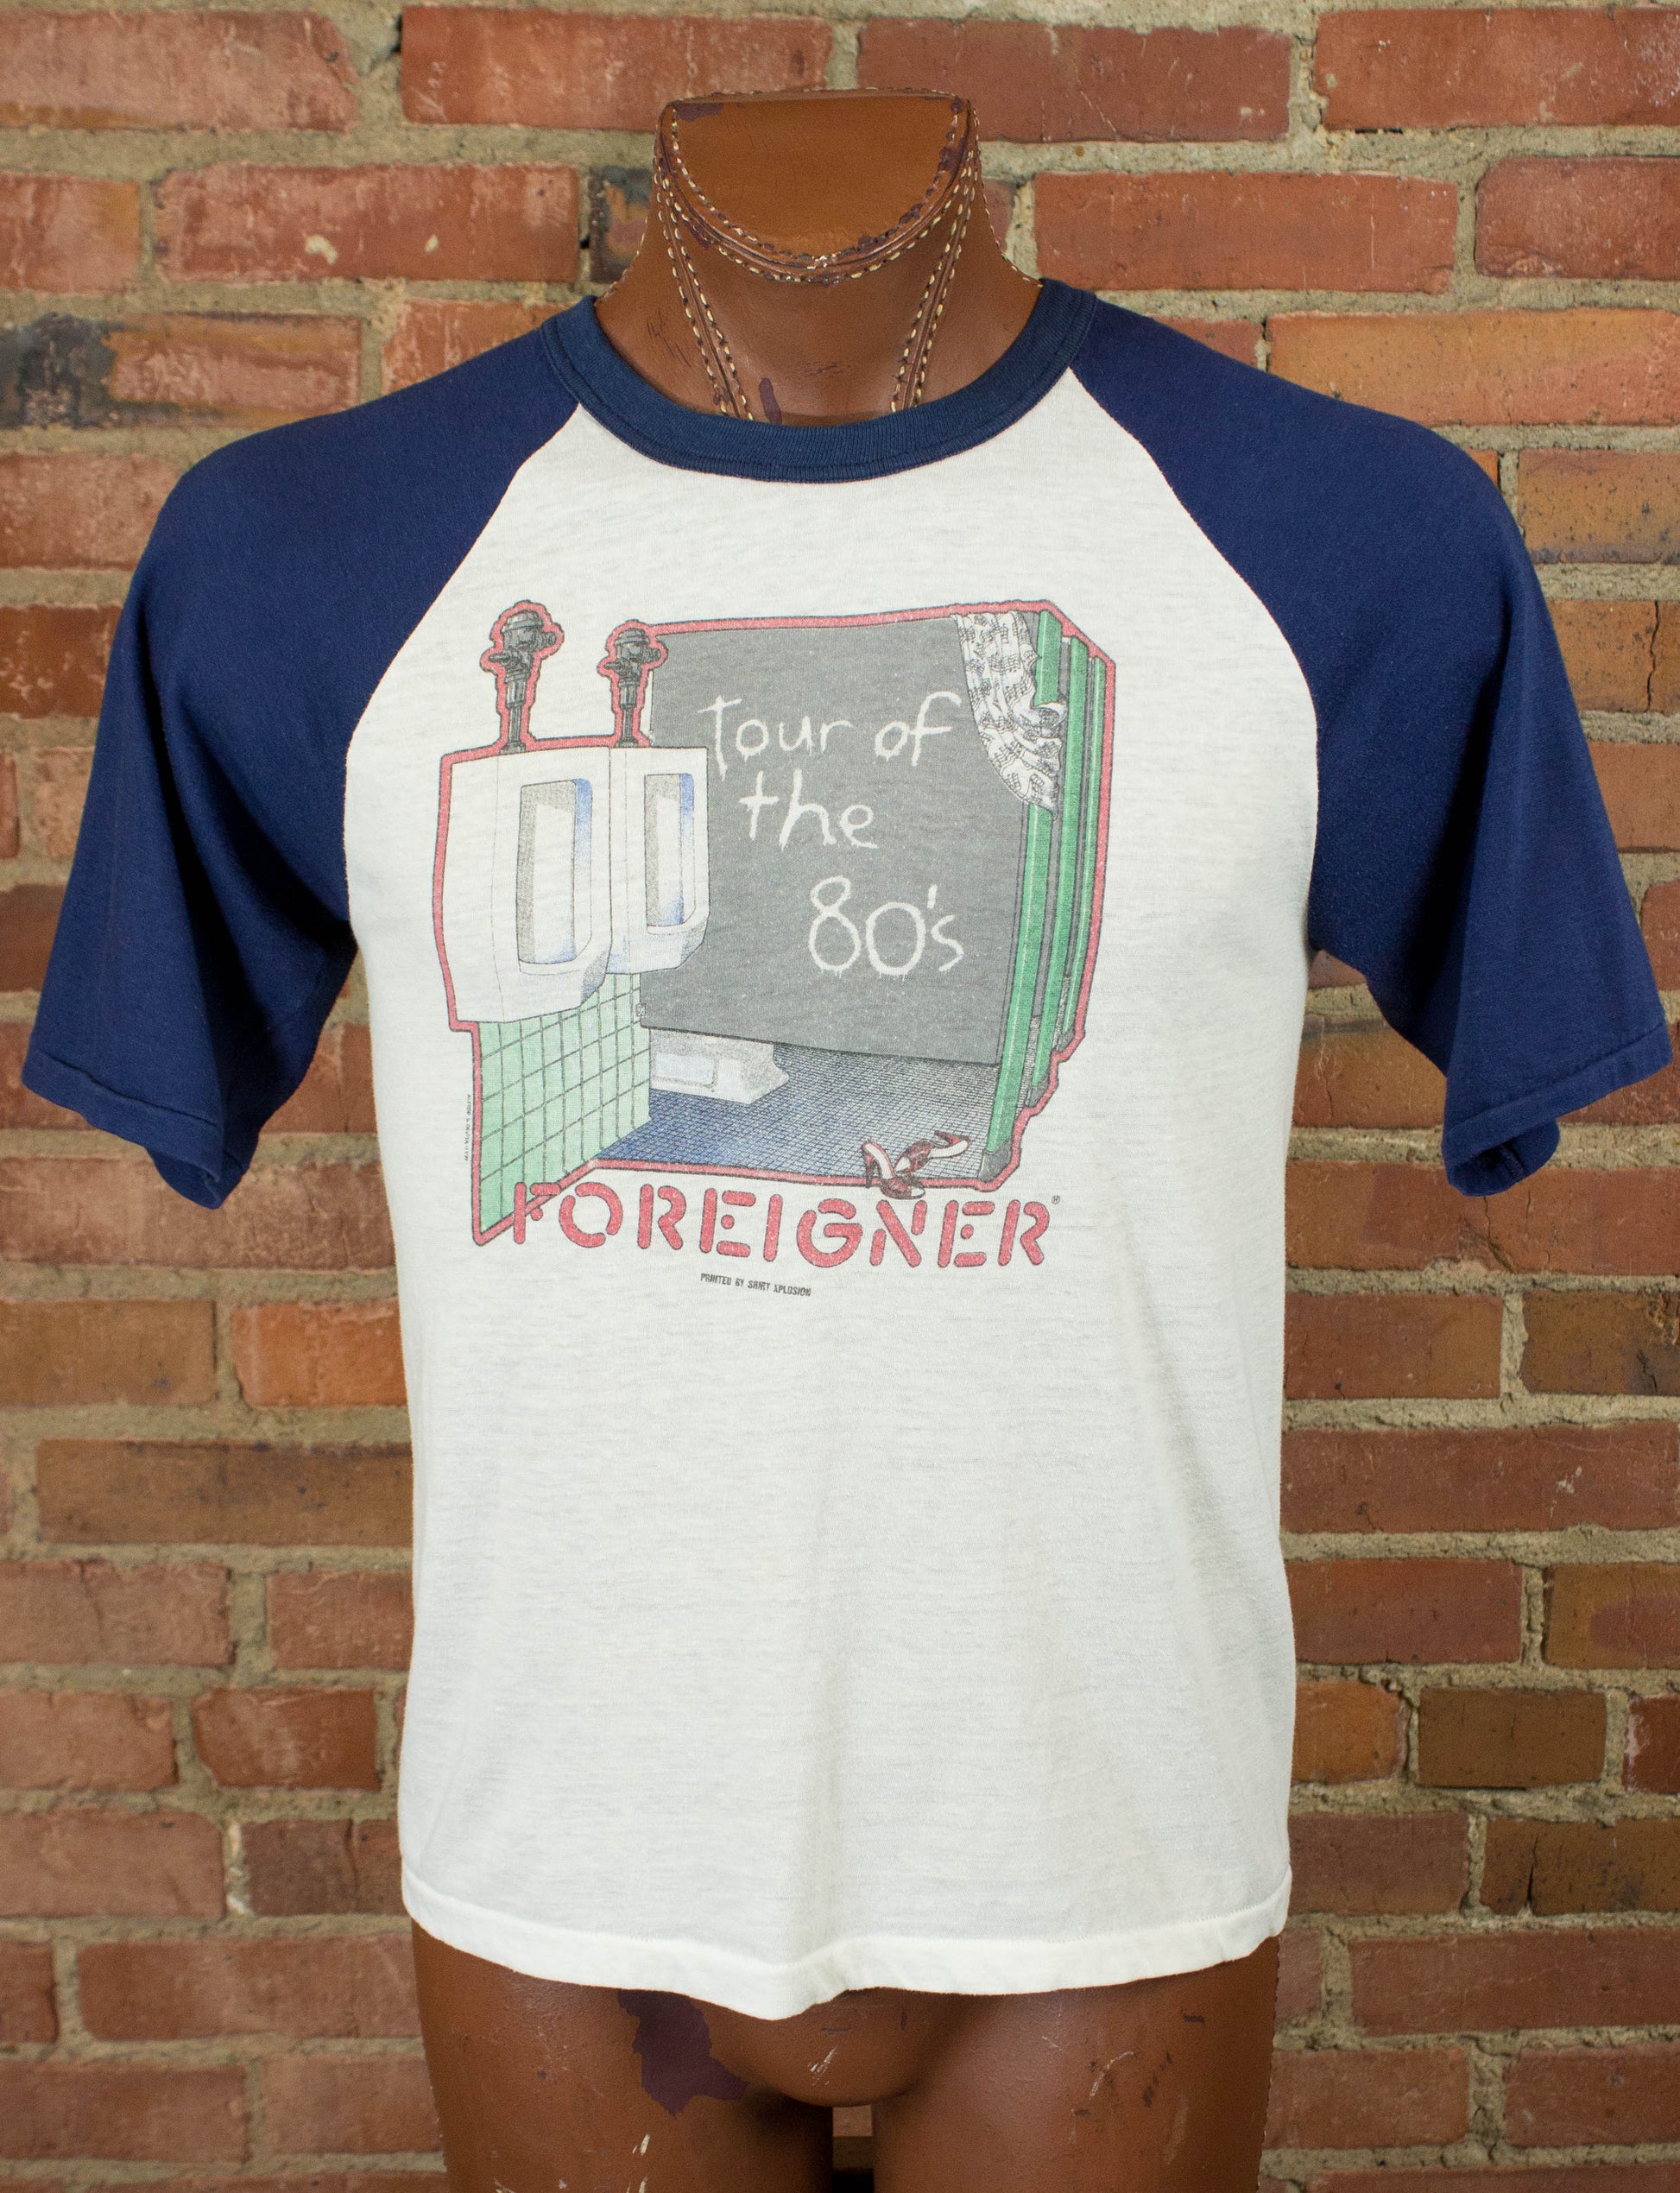 Foreigner 80s Tour of the 80s Urinals Head Games White and Navy Blue Raglan Jersey Concert T Shirt Unisex Medium